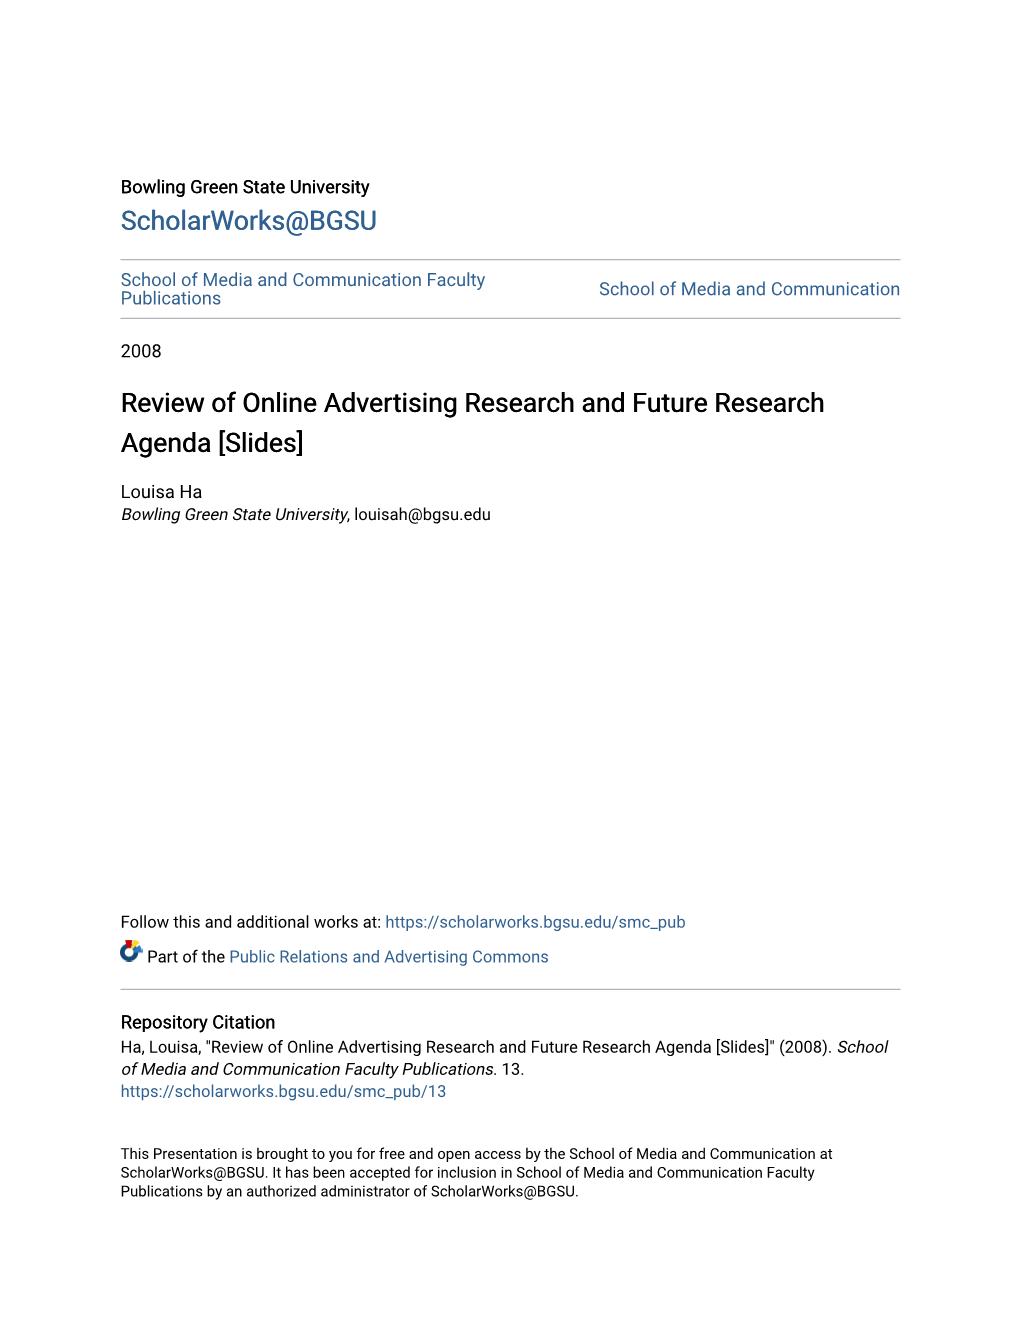 Review of Online Advertising Research and Future Research Agenda [Slides]